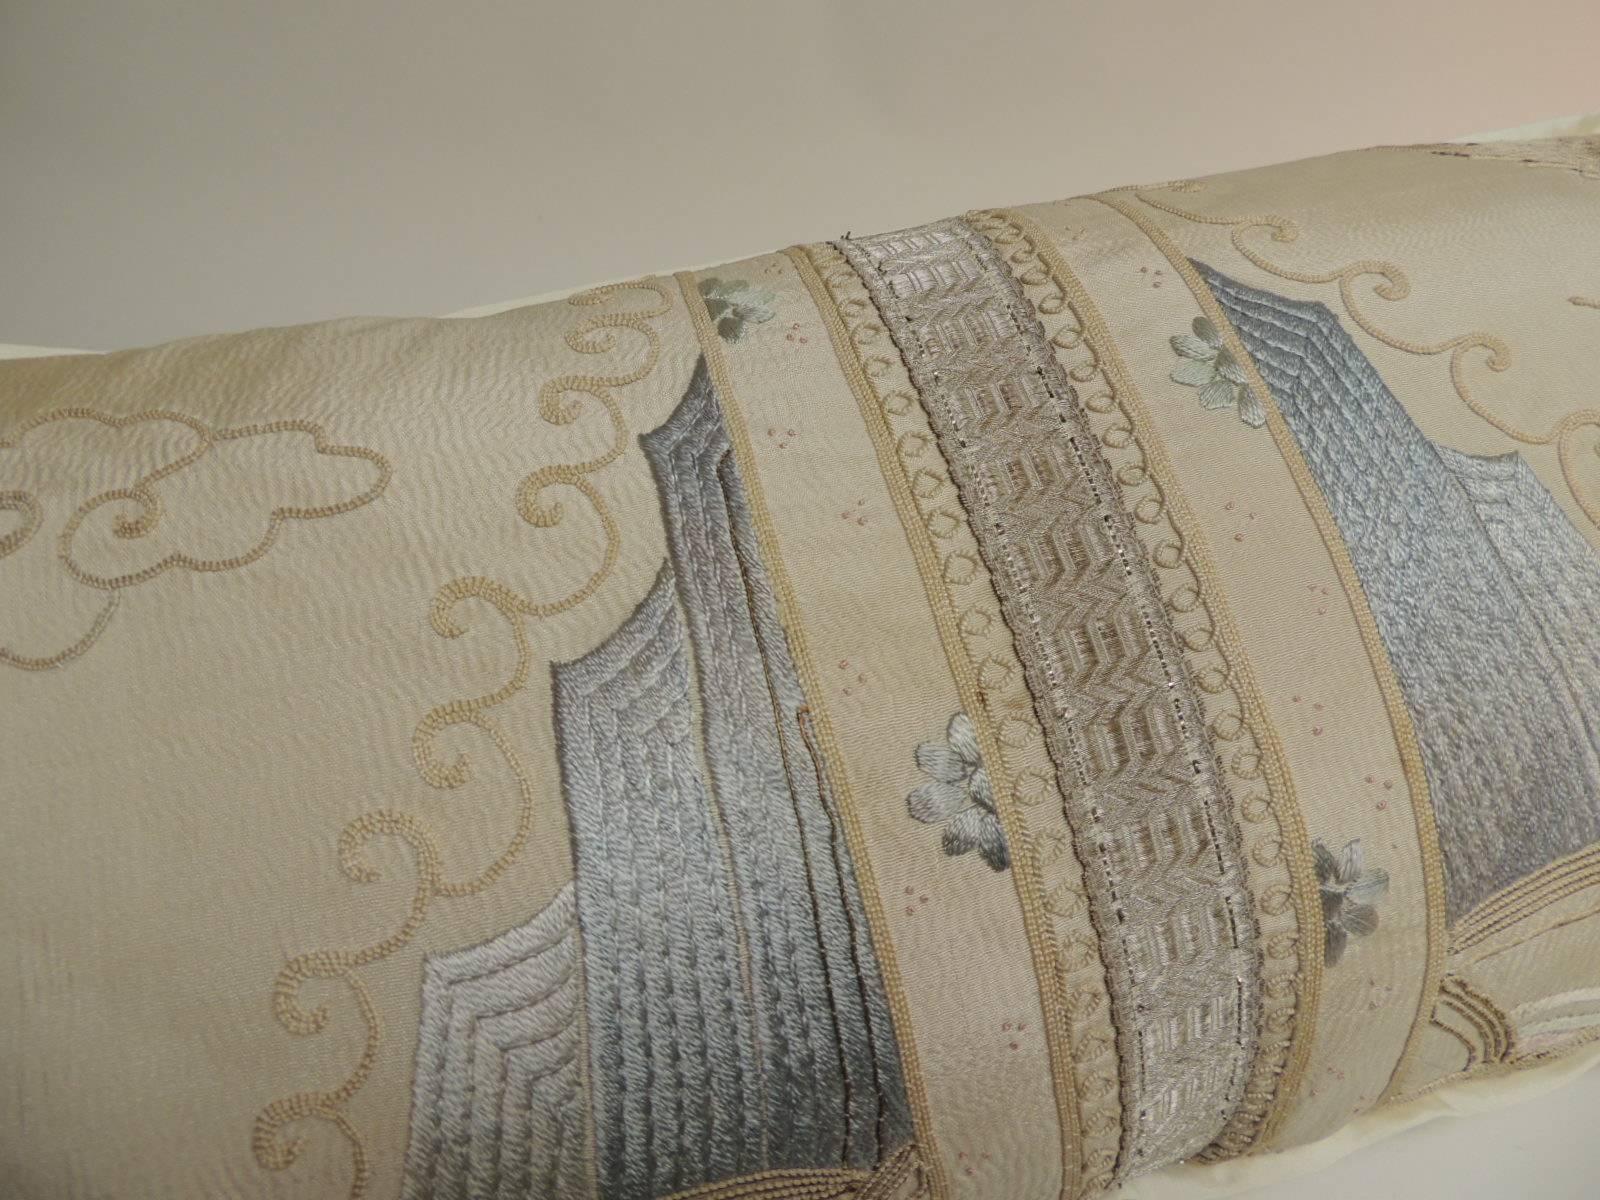 Japonisme 19th Century Asian Embroidered Deco Dragon Silk Bolster Decorative Pillow